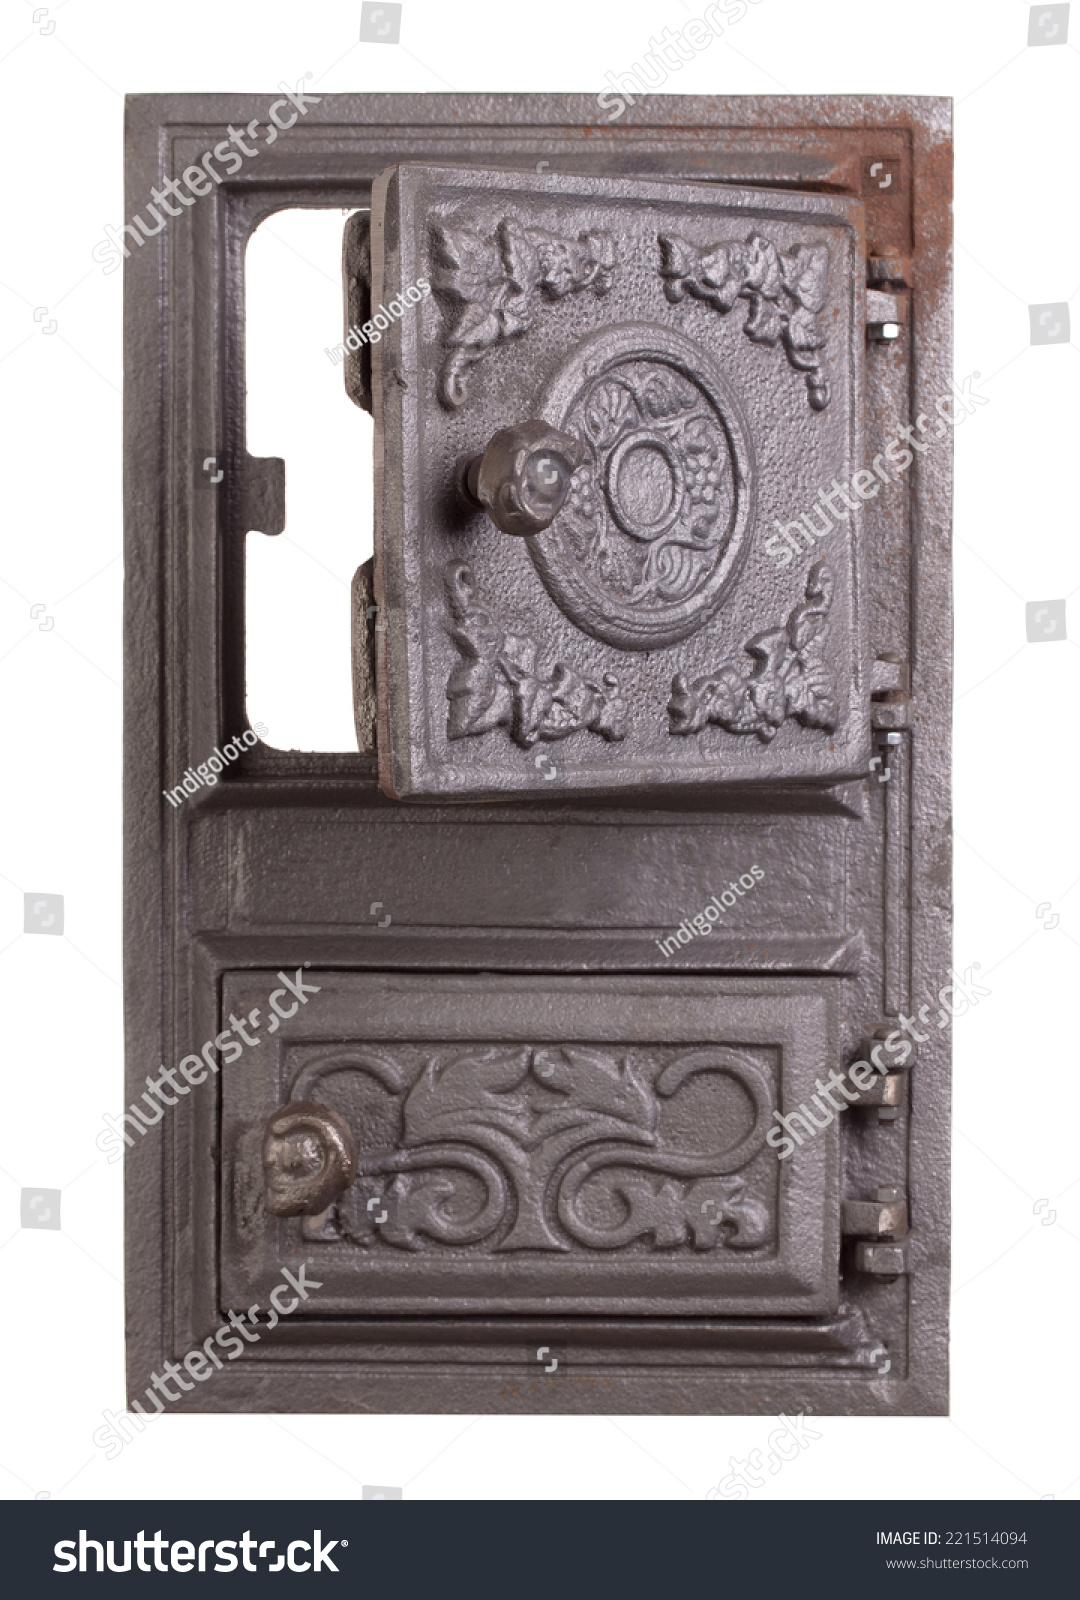 Cast iron door for furnaces. Isolated on the white background. #221514094